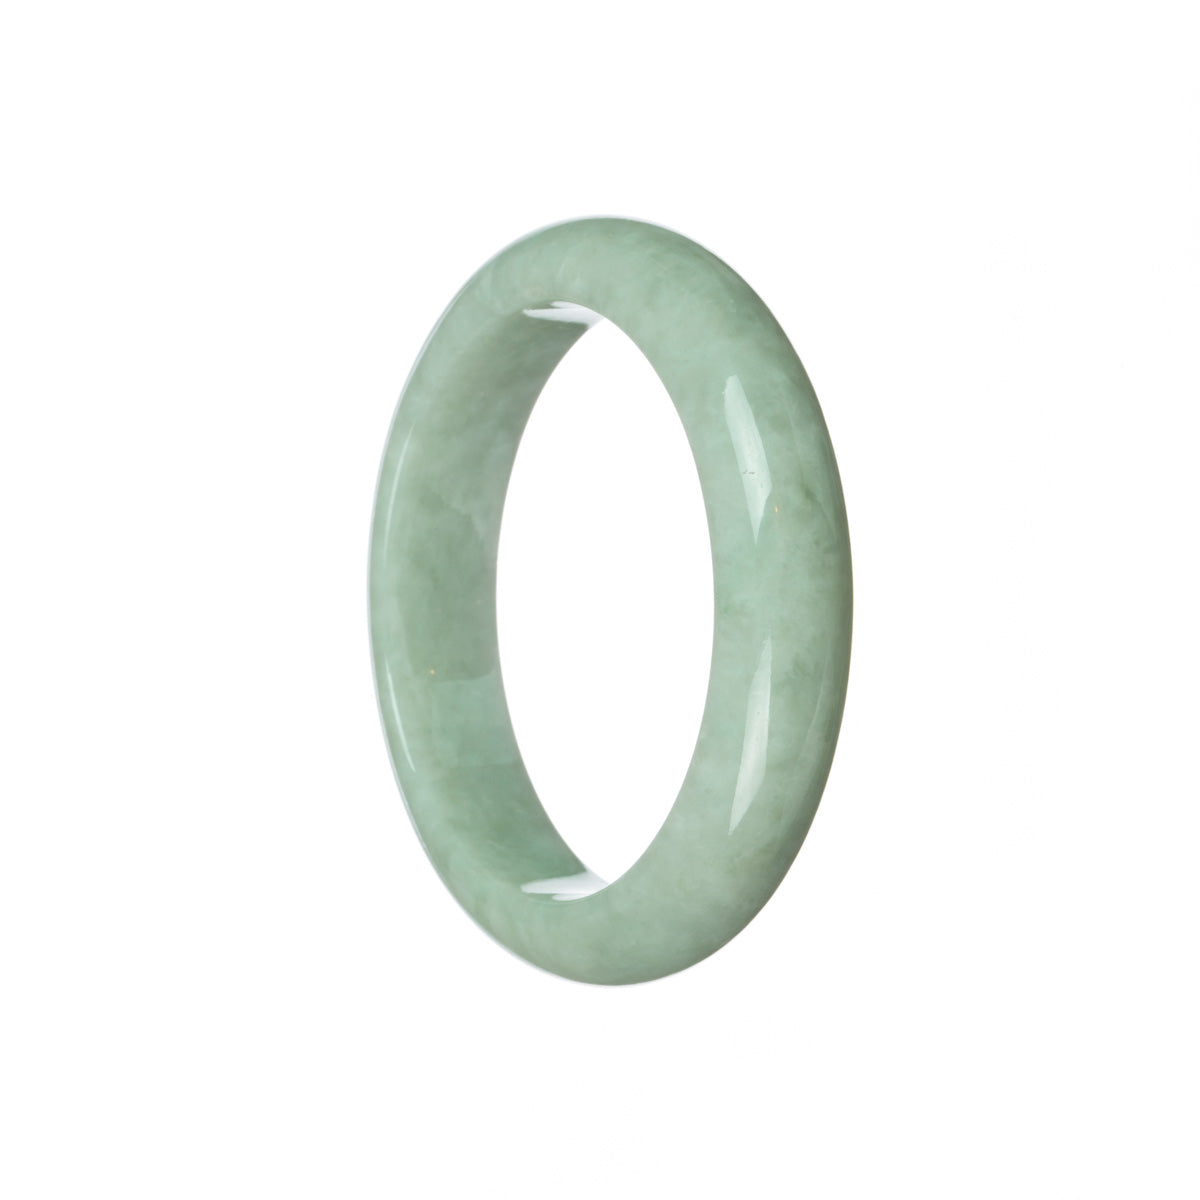 An elegant light green jade bangle bracelet with a half moon design, made from authentic Grade A jade. Perfect for adding a touch of natural beauty to any outfit.